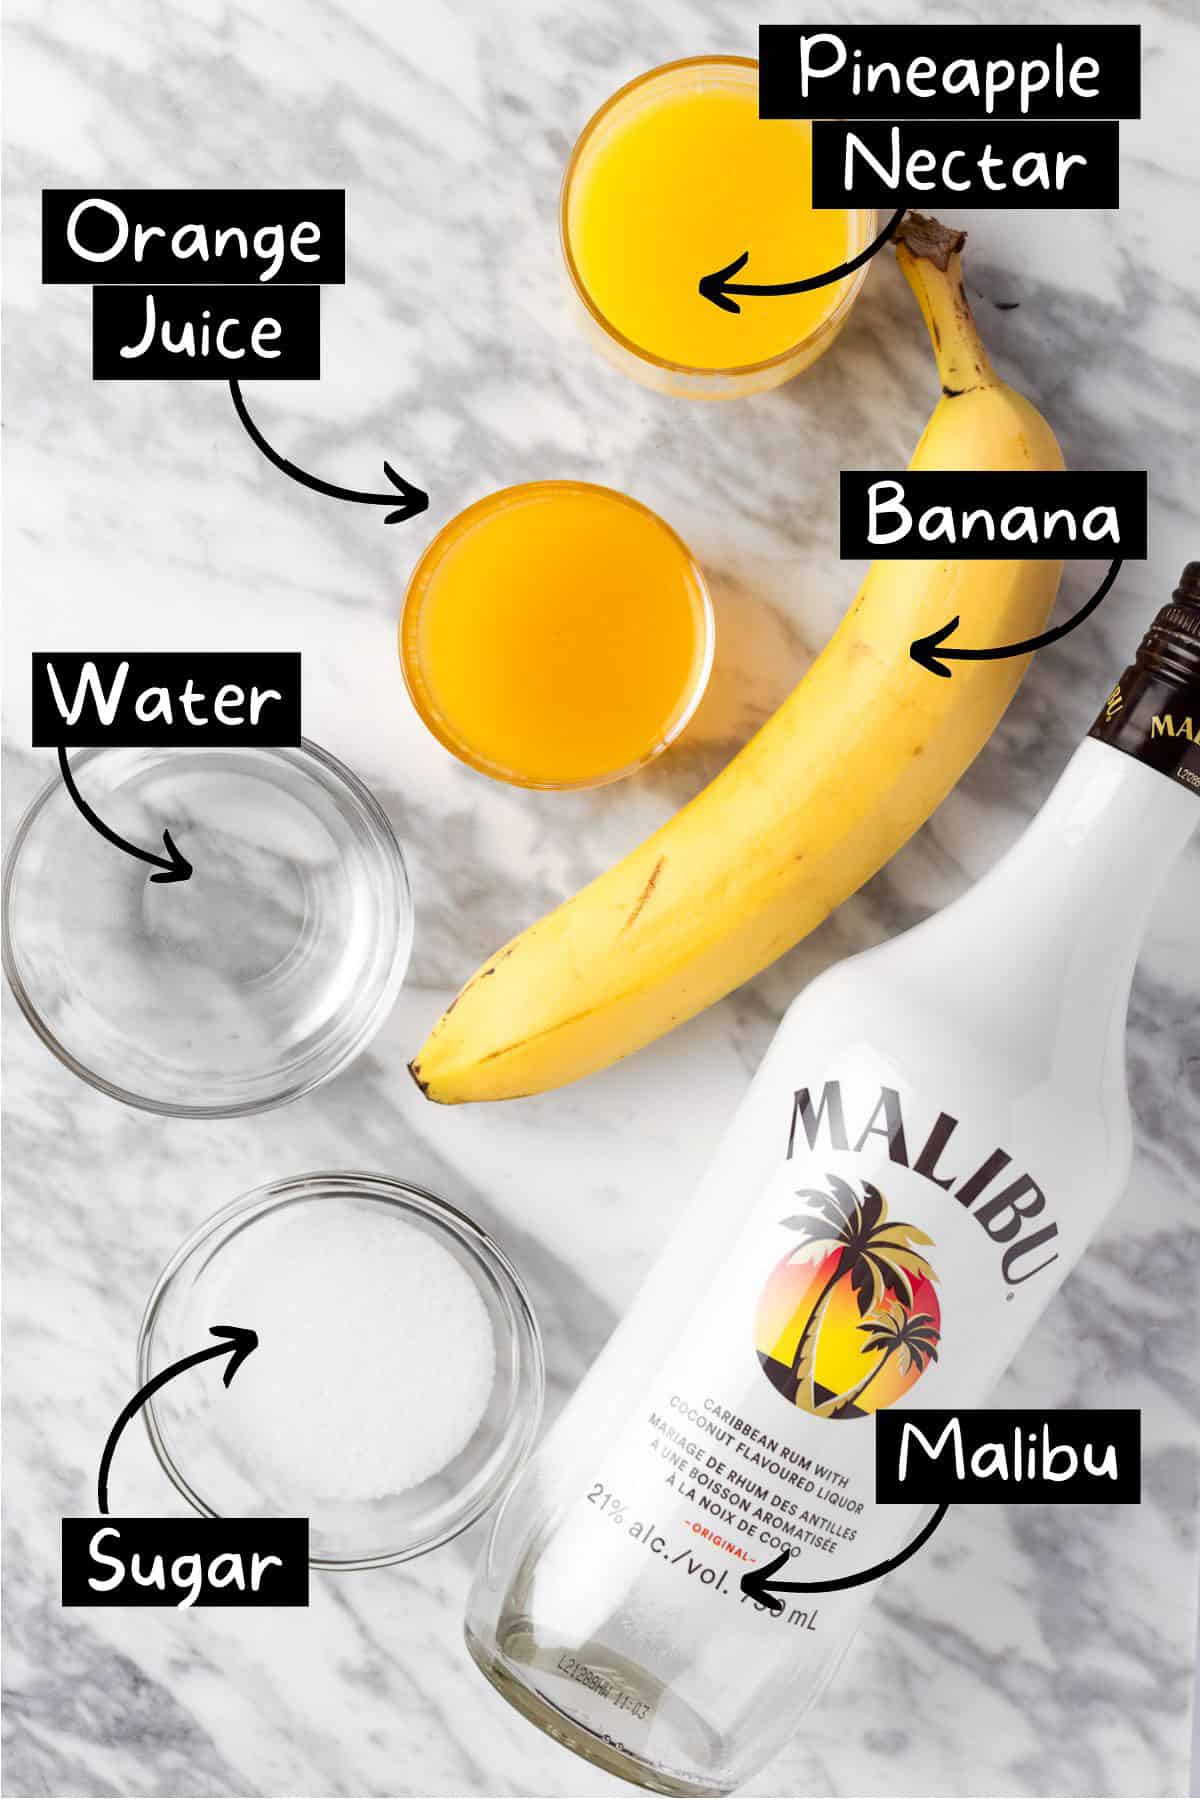 The ingredients needed to make the banana rum cocktail.